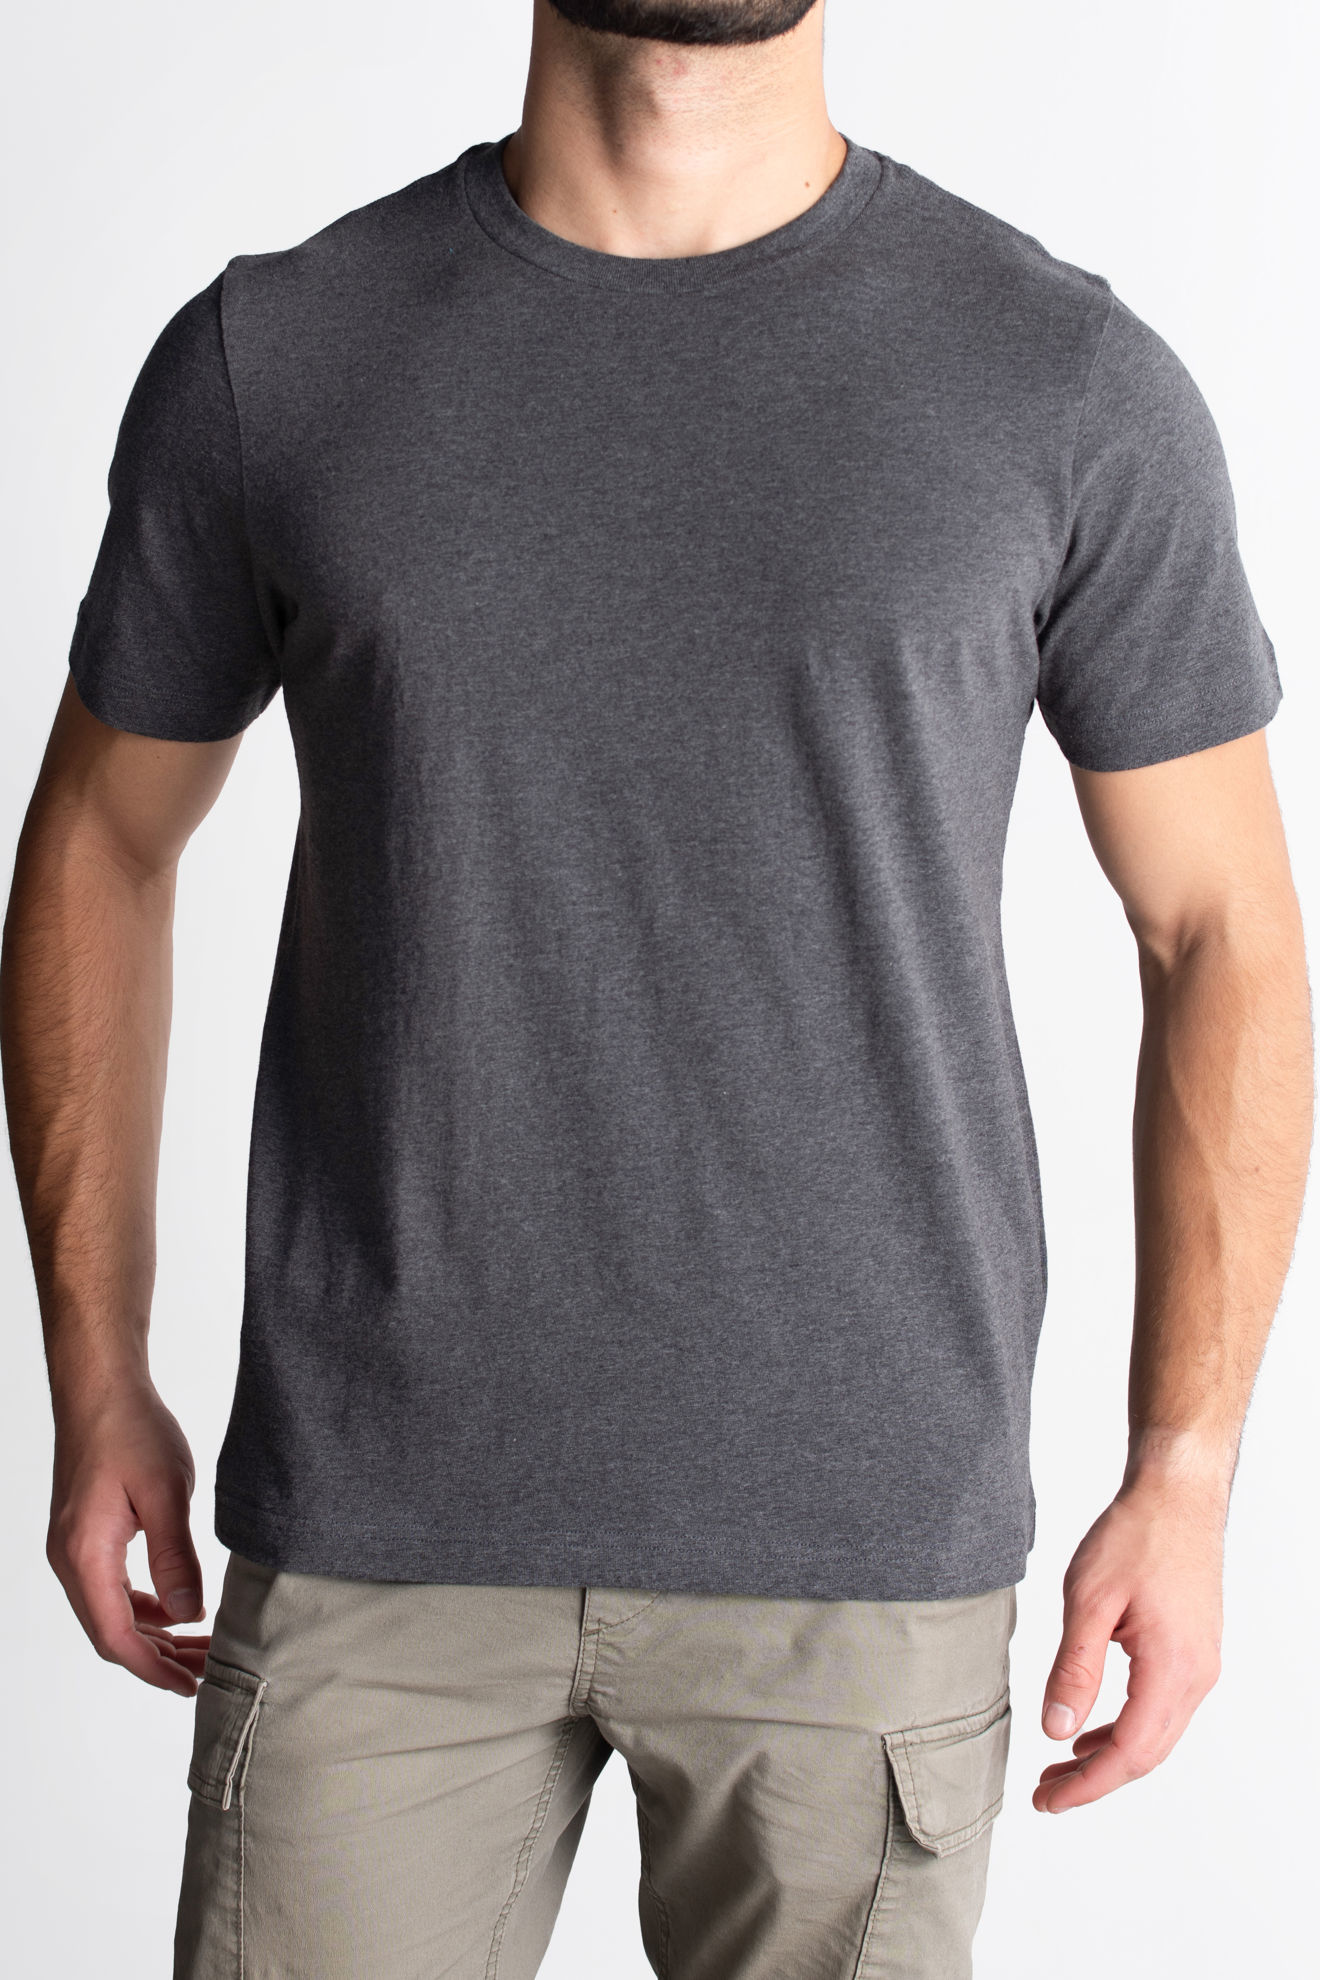 Picture of Short Sleeve t-Shirt - Charcoal Grey